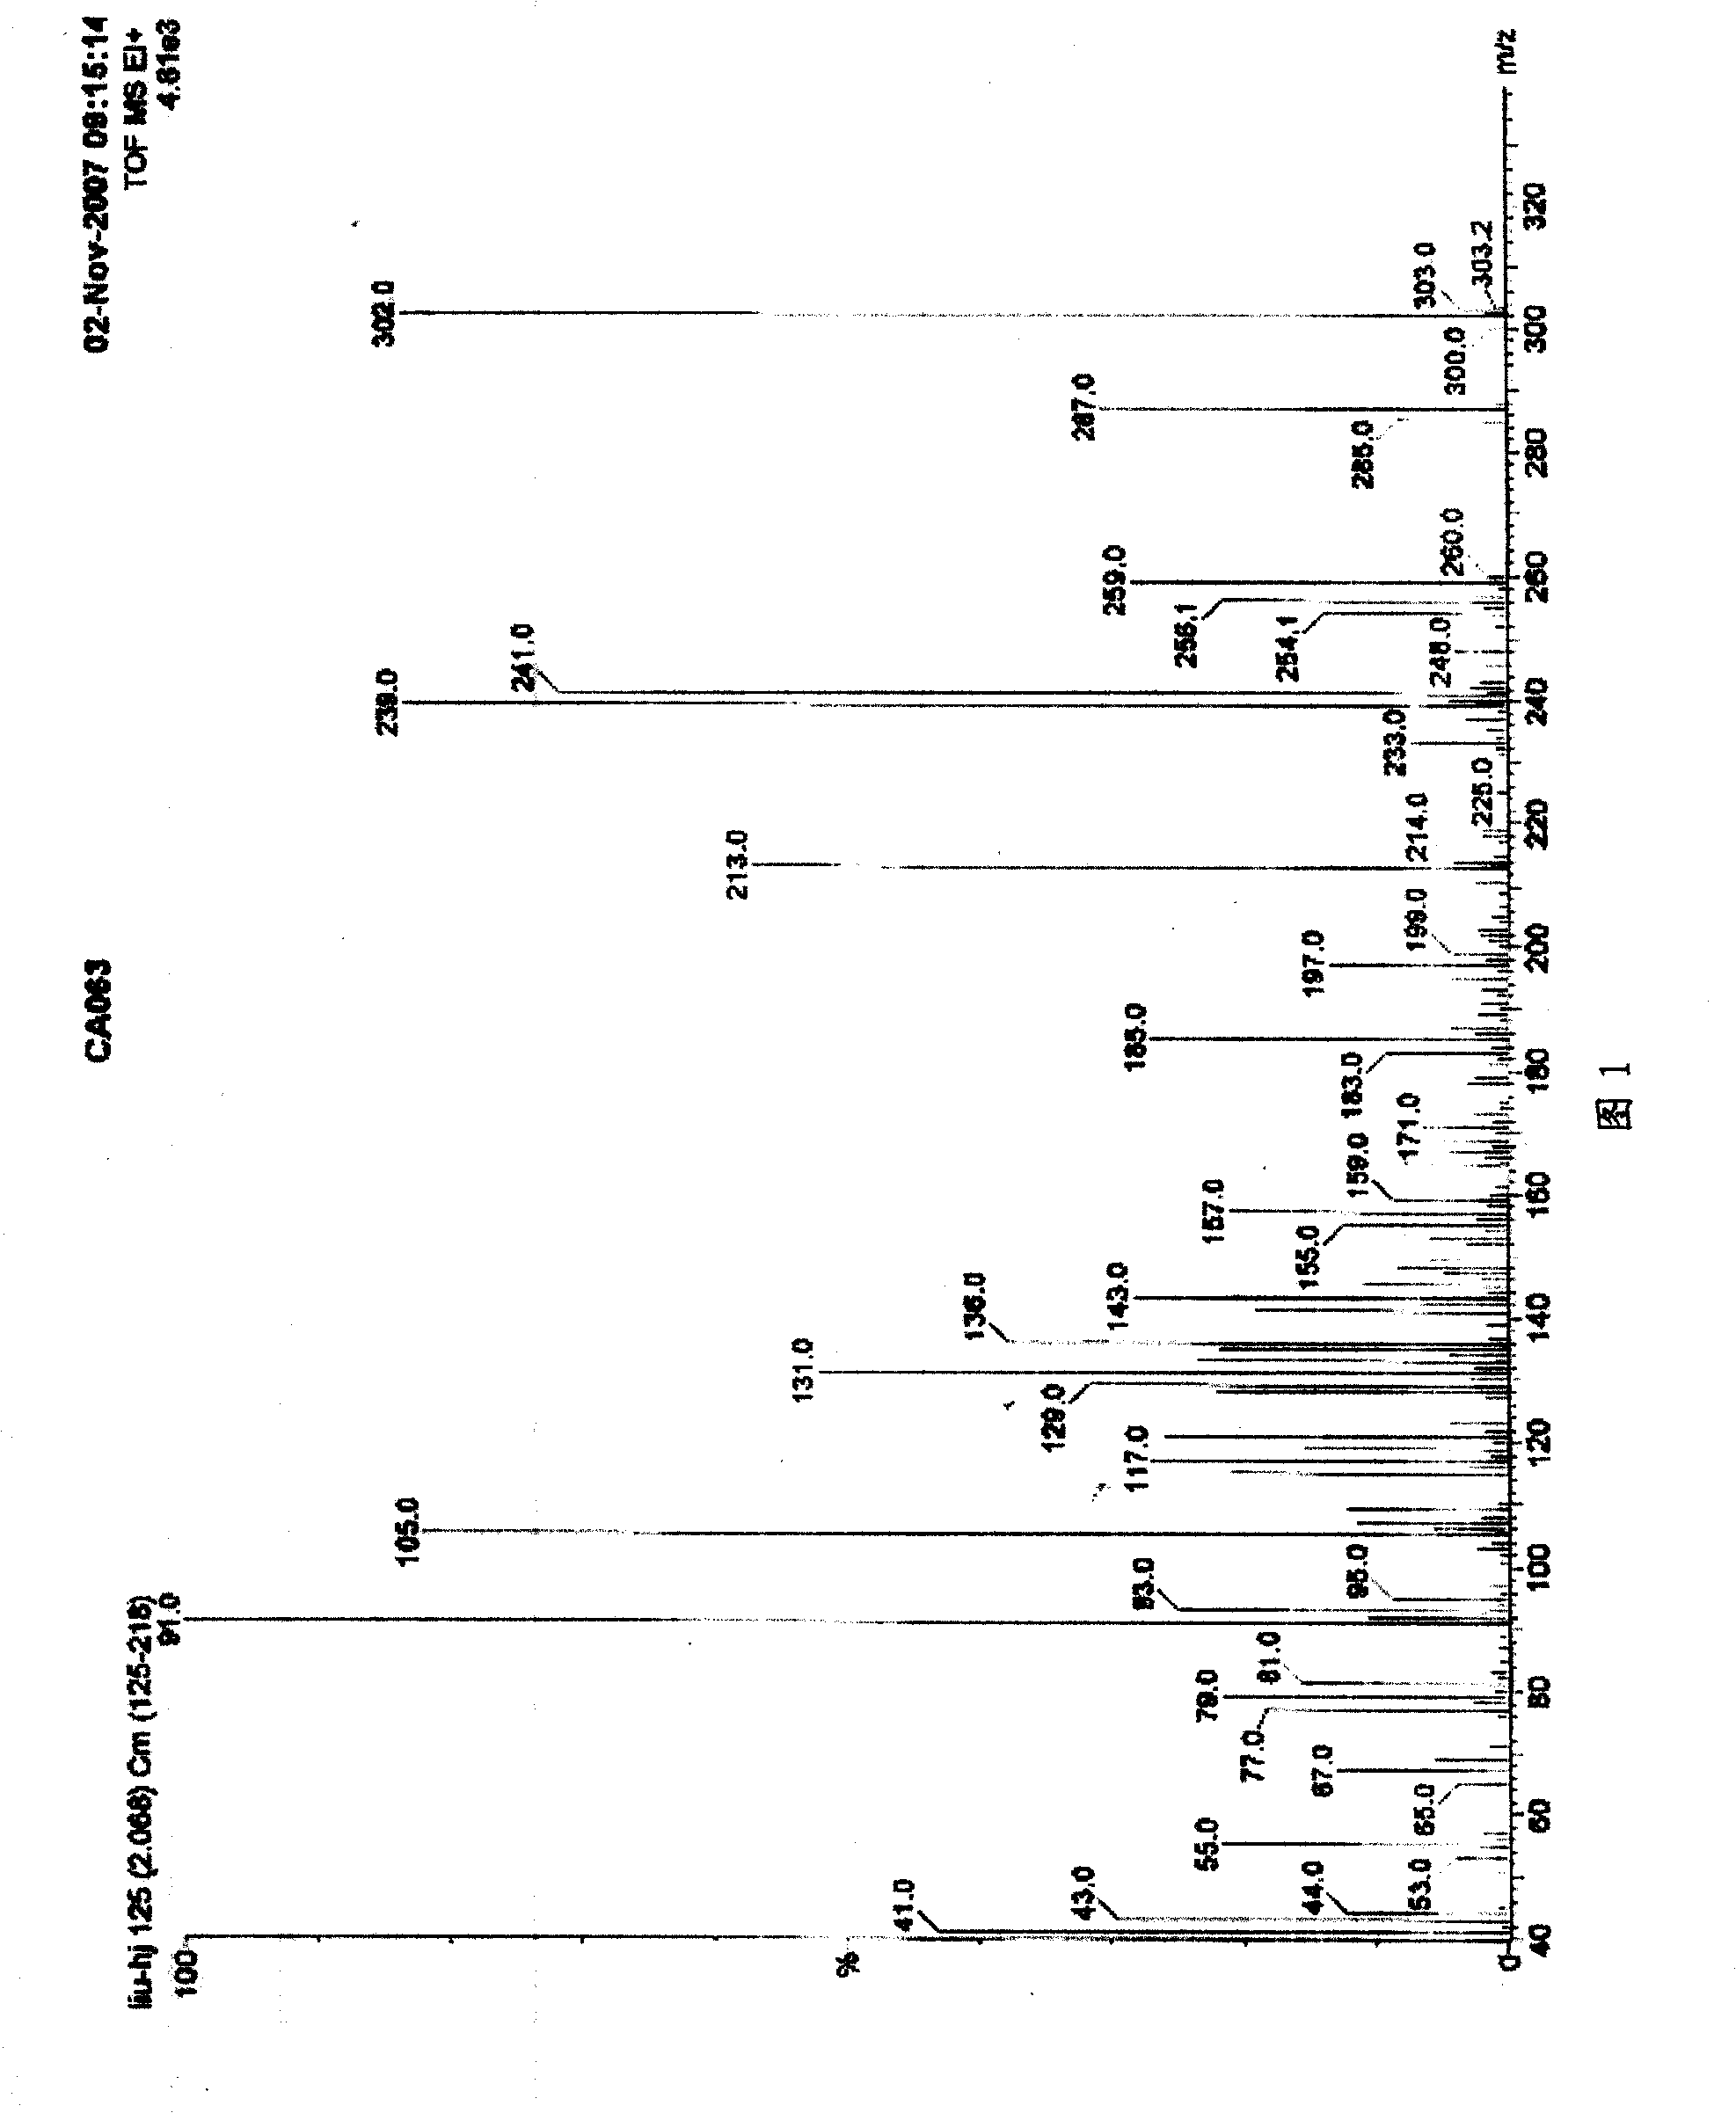 Process for producing abietic acid